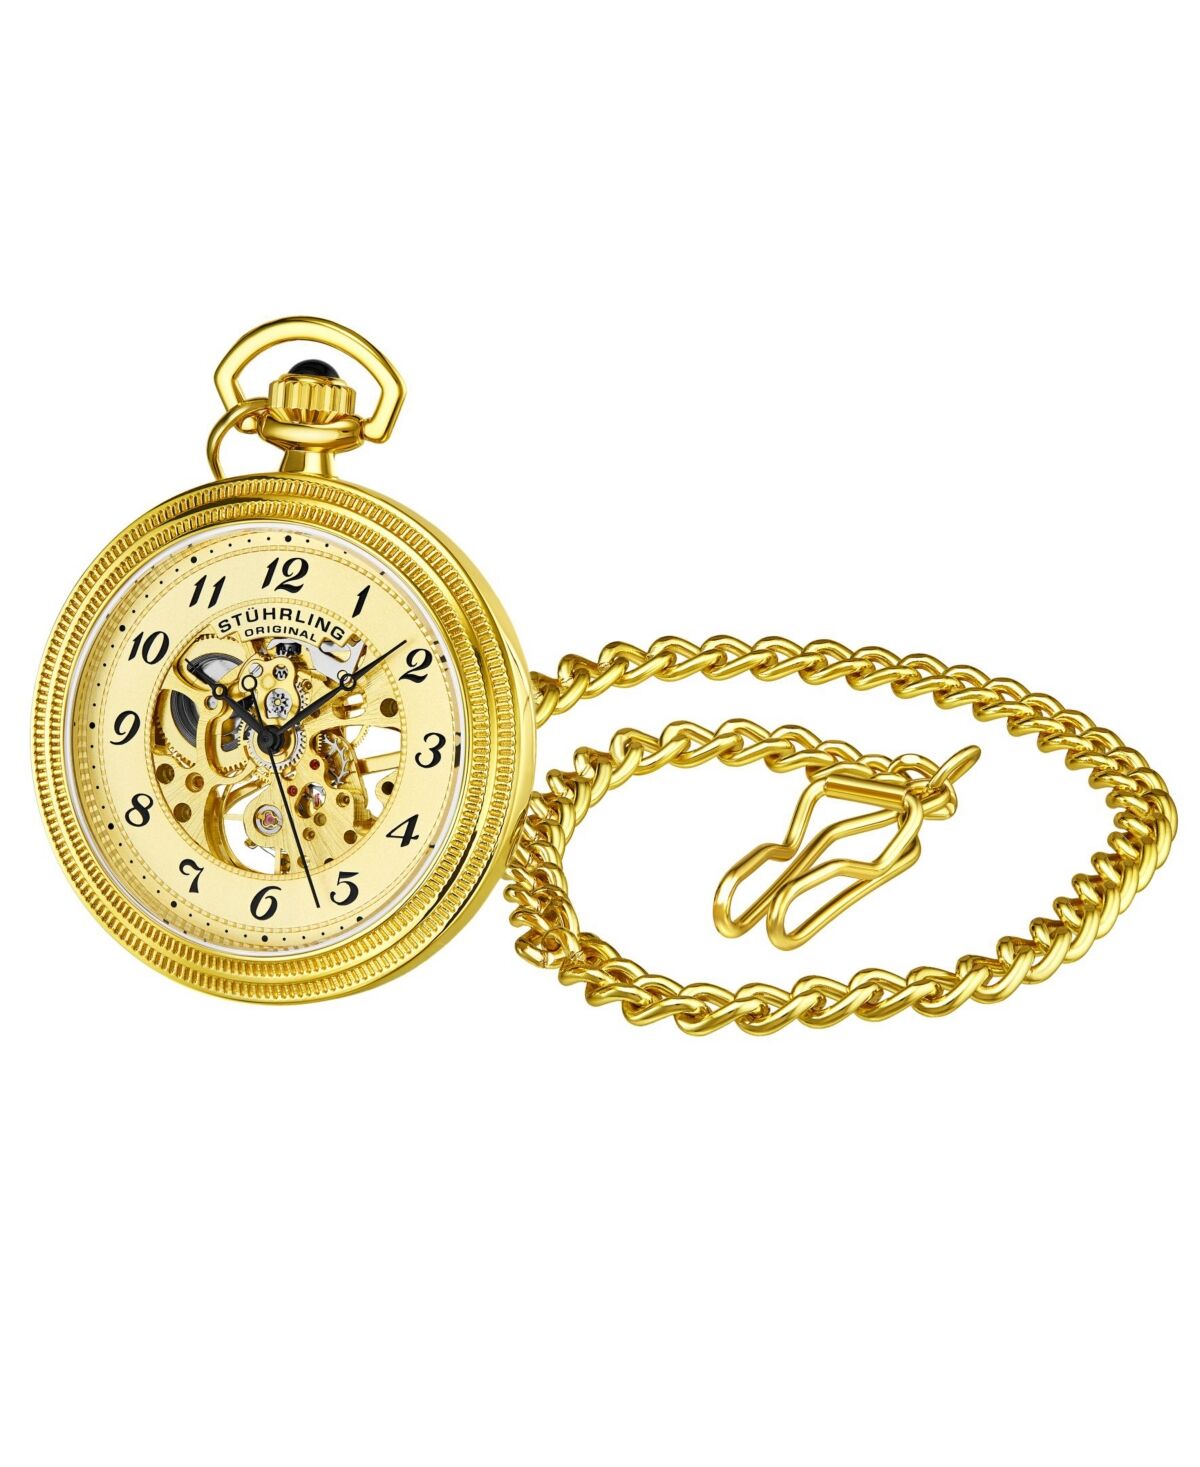 Stuhrling Men's Gold Tone Stainless Steel Chain Pocket Watch 48mm - Silver